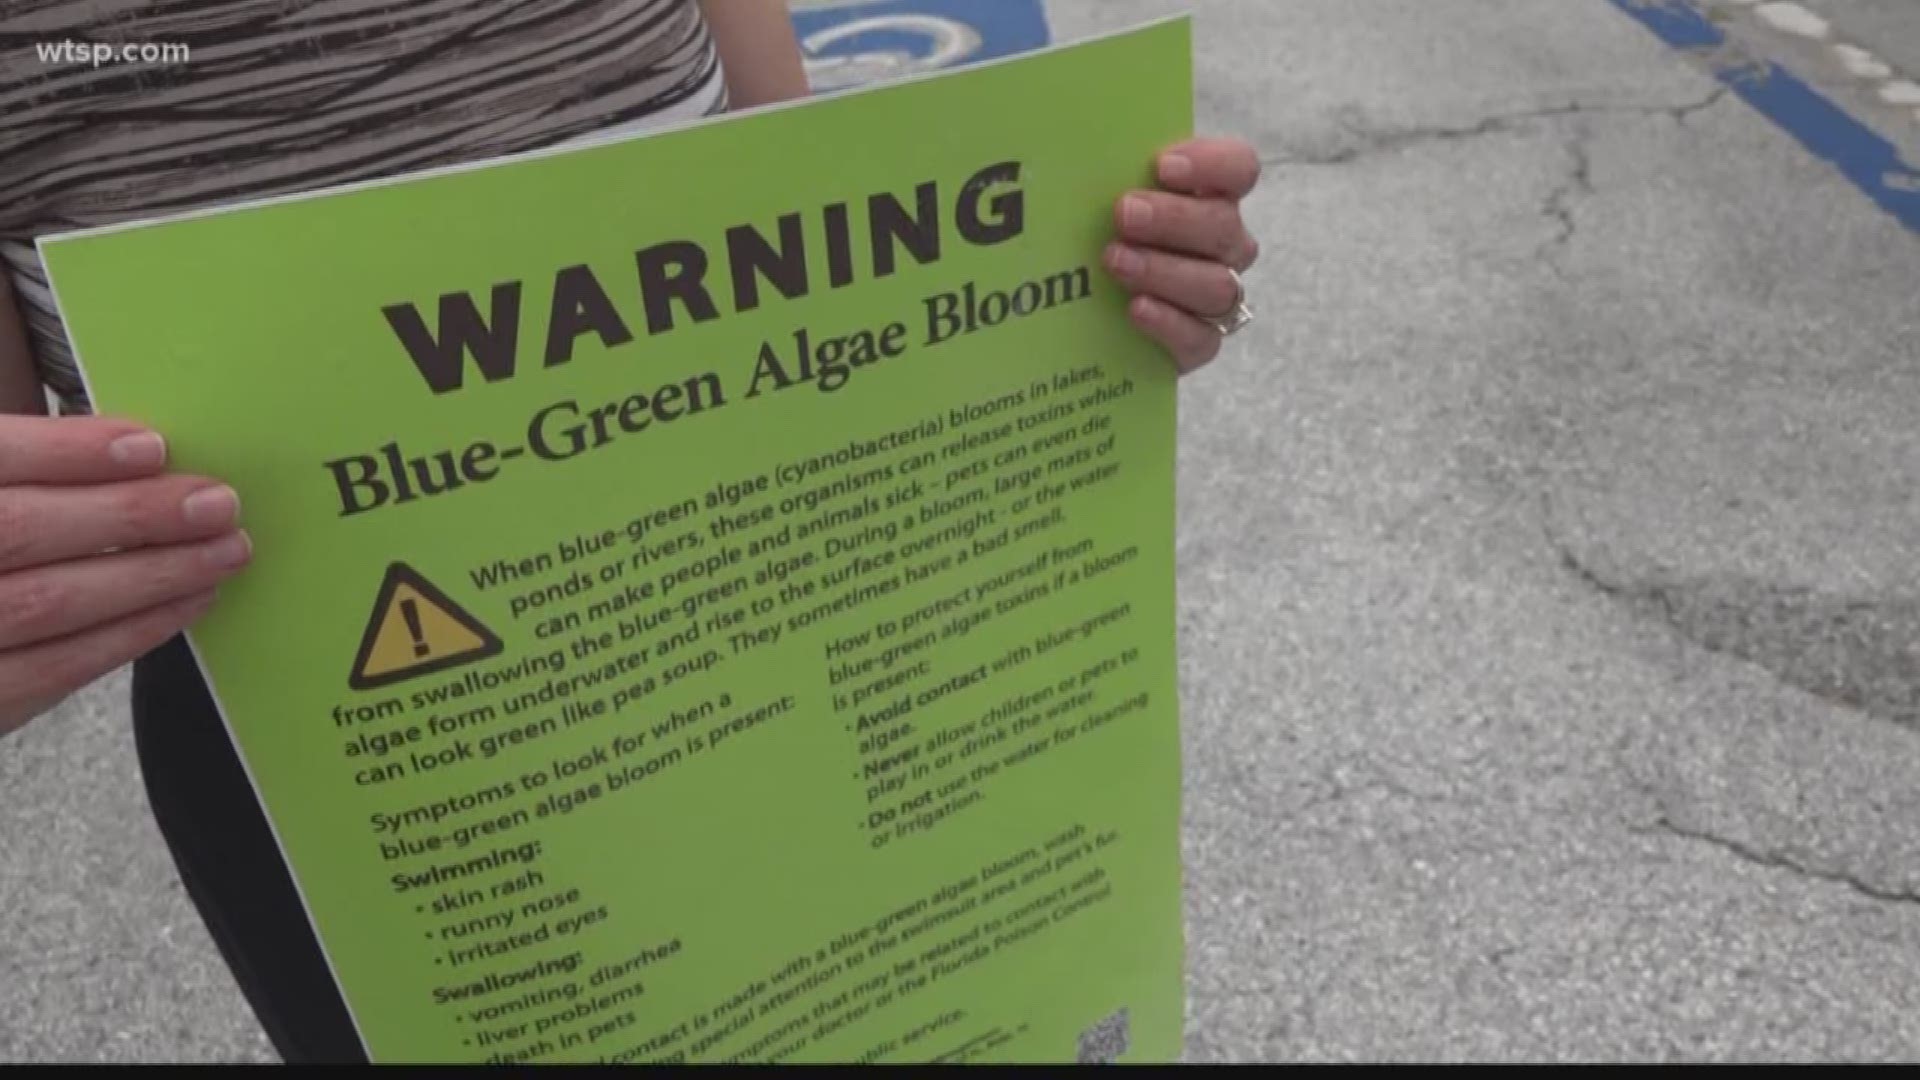 Researchers from Florida Gulf Coast University are teaming up with scientists from across the state to study the impacts of blue-green algae on human health.